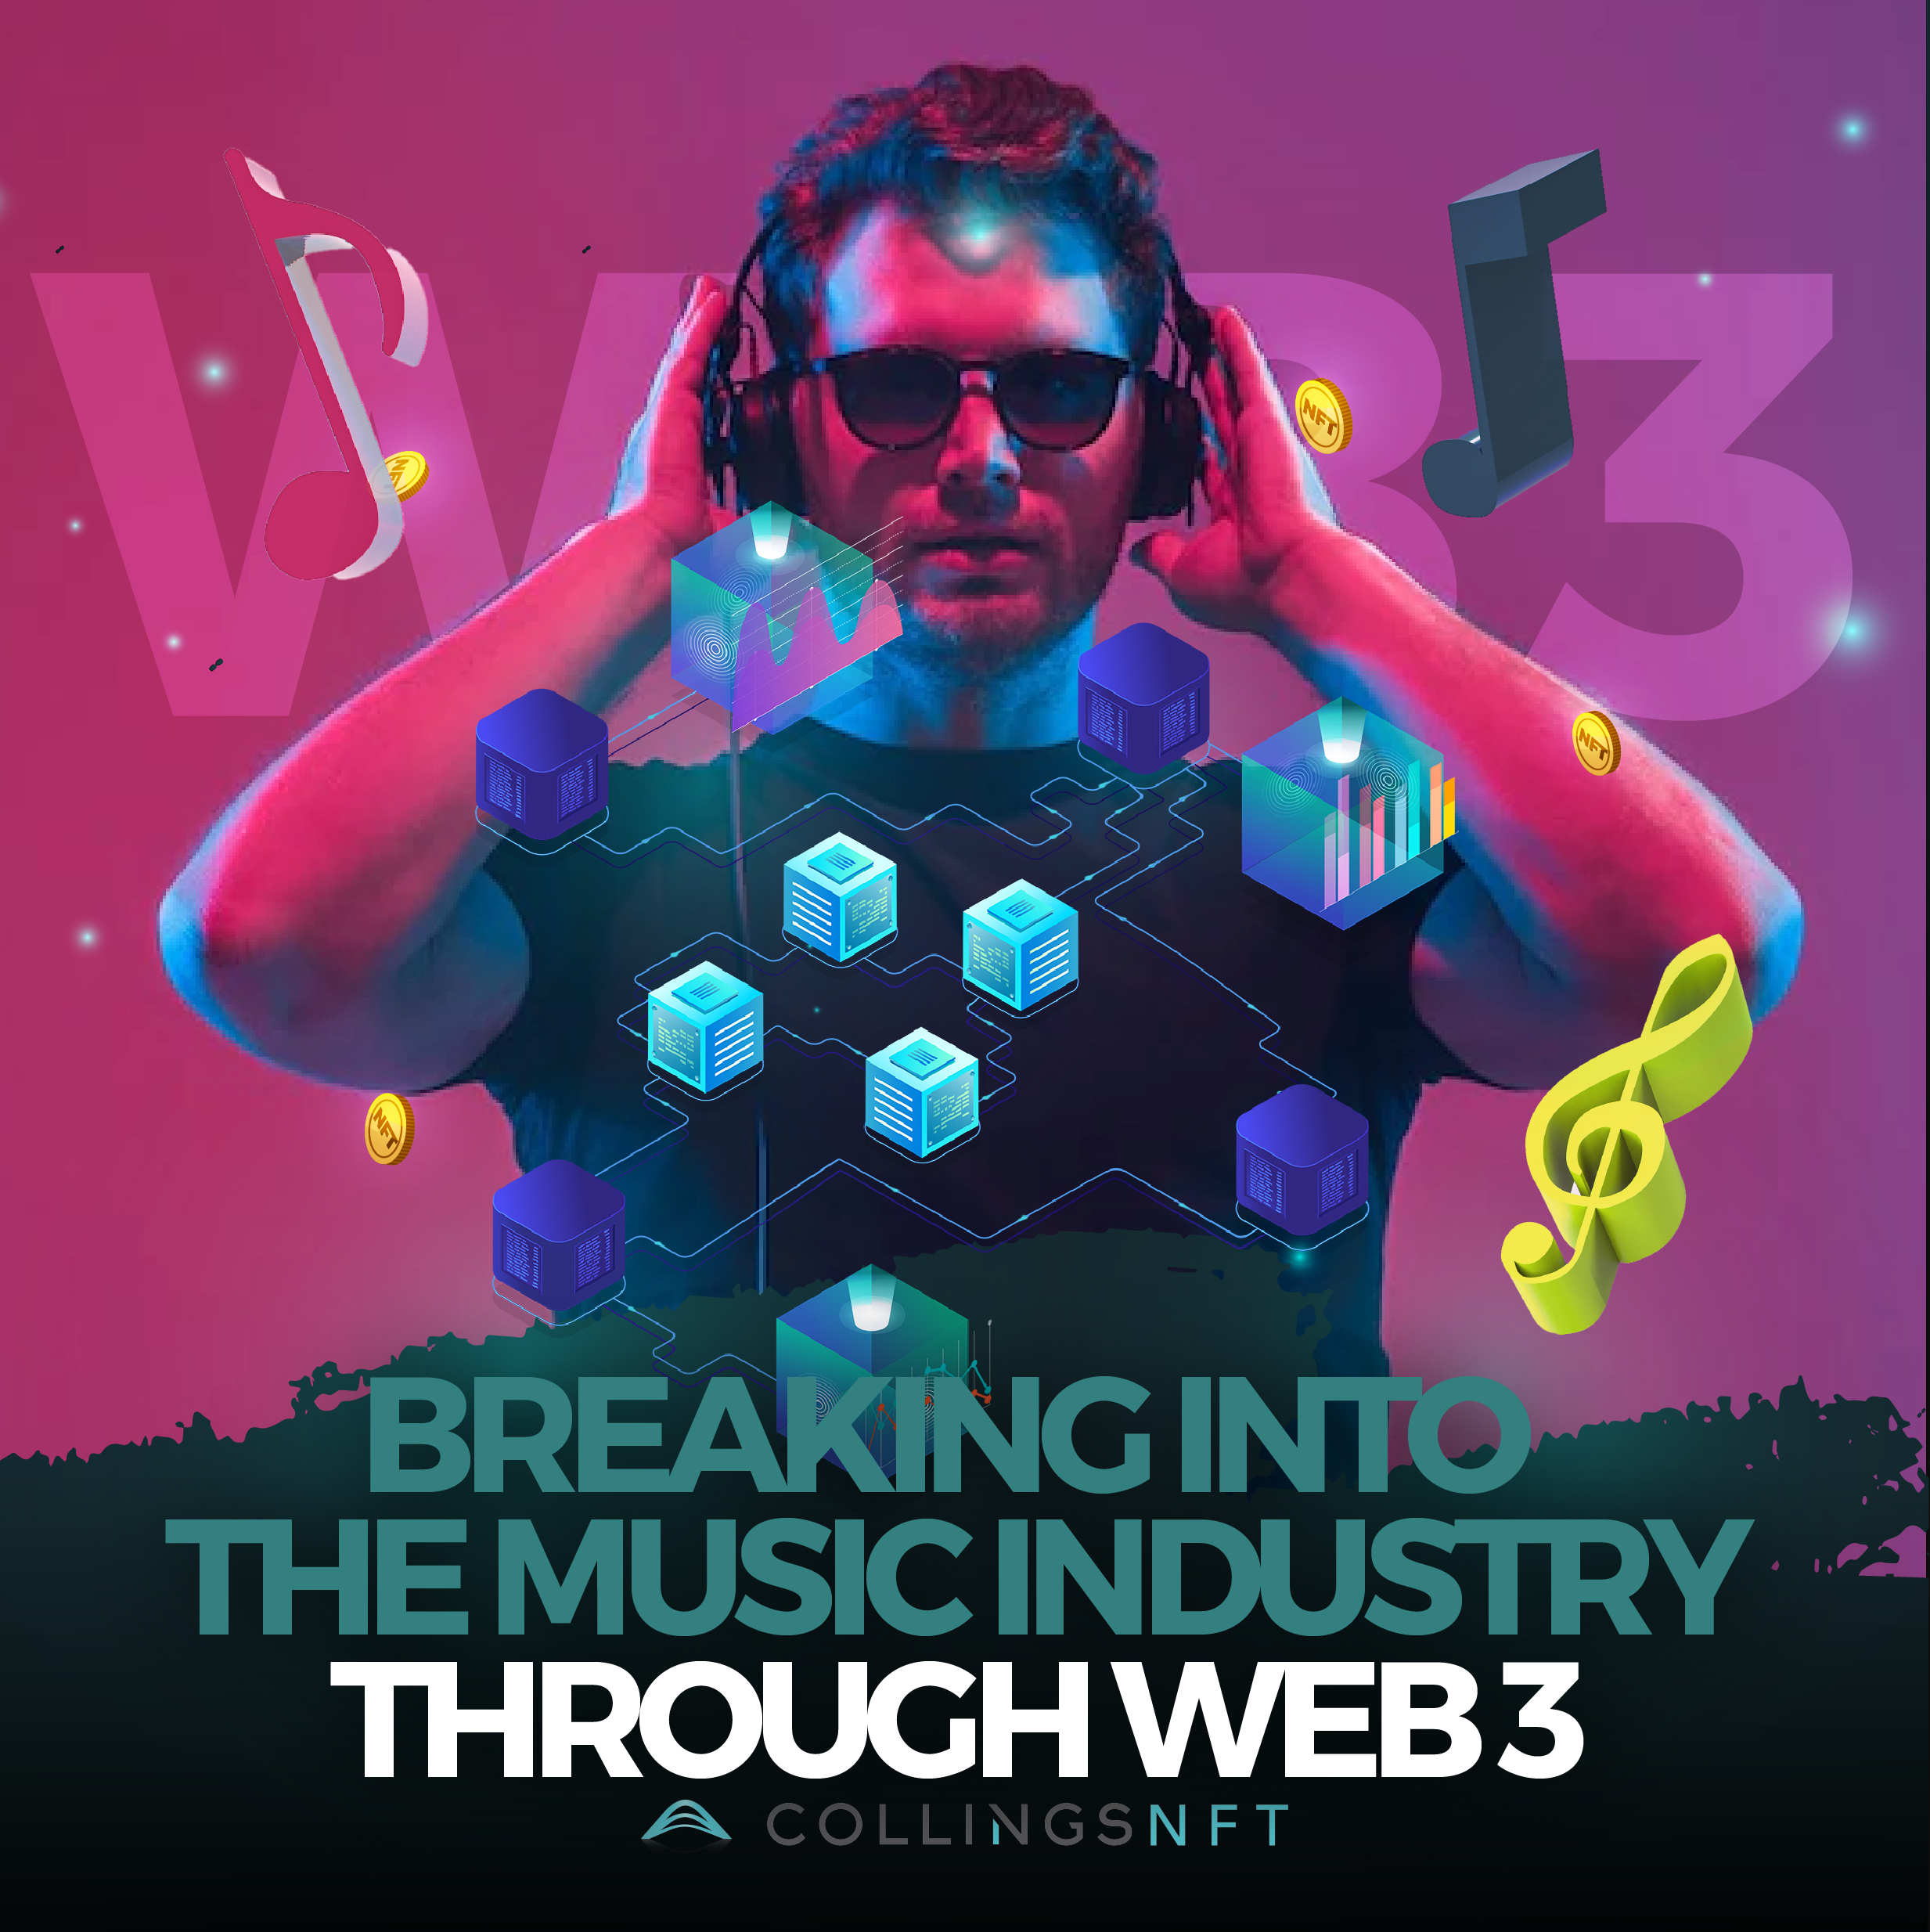 Breaking Into the Music Industry Through Web 3 - Collings NFT